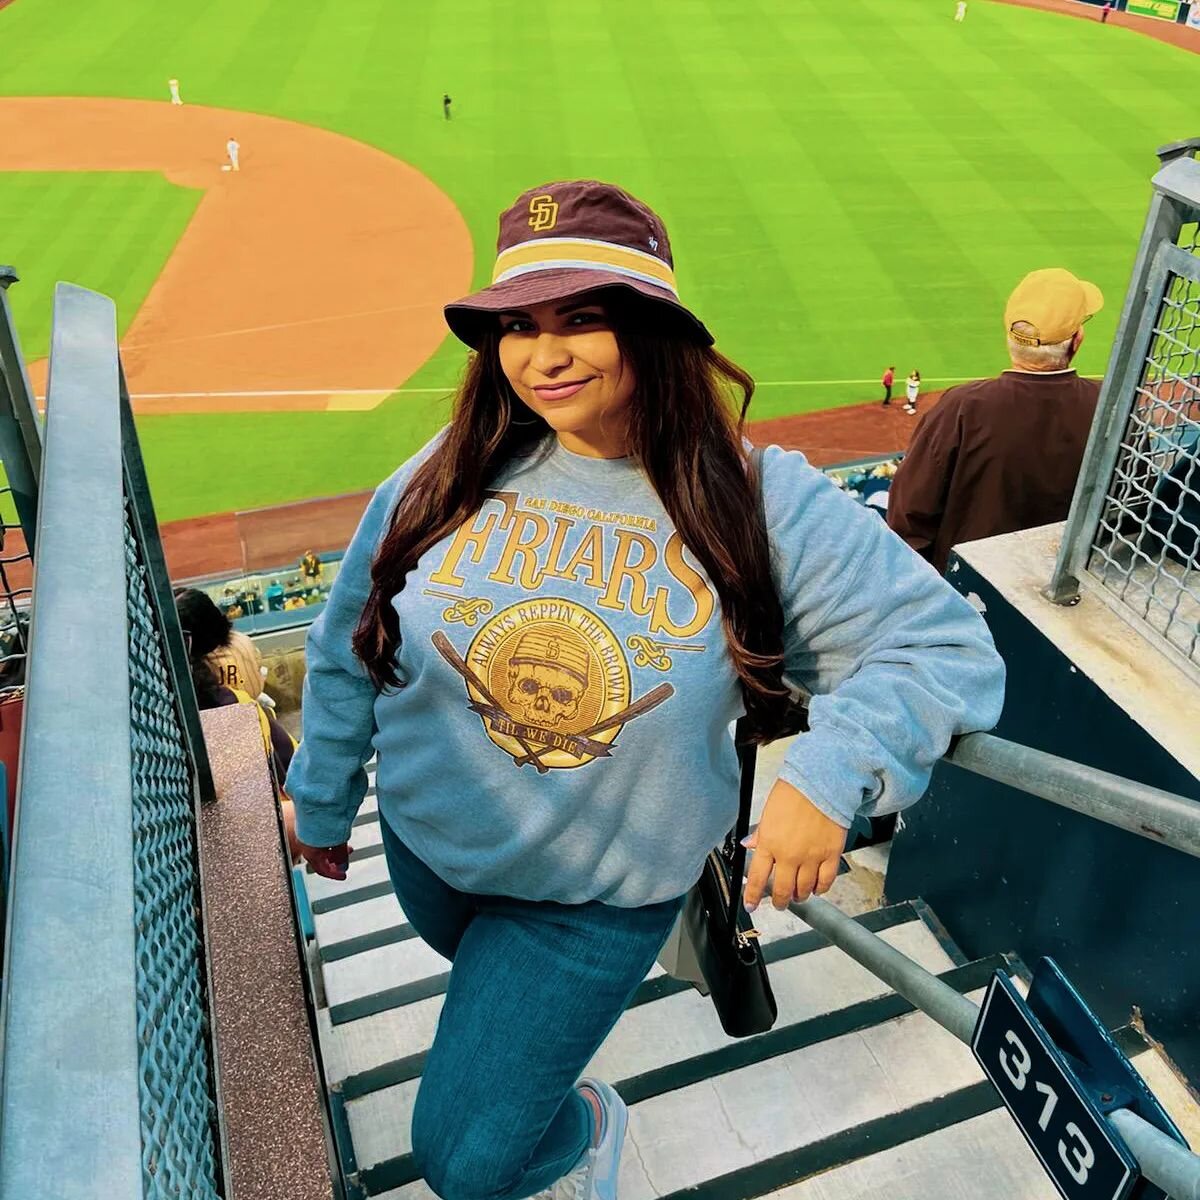 Back in action tonight. Let's get it FRIARS 💀⚾ @misssanj repping the Brown. 

#friarstilwedie #friarfaithful #sandiegopadres #padres #daygo #sandiegobrand #slamdiego #hungryformore #petcopark